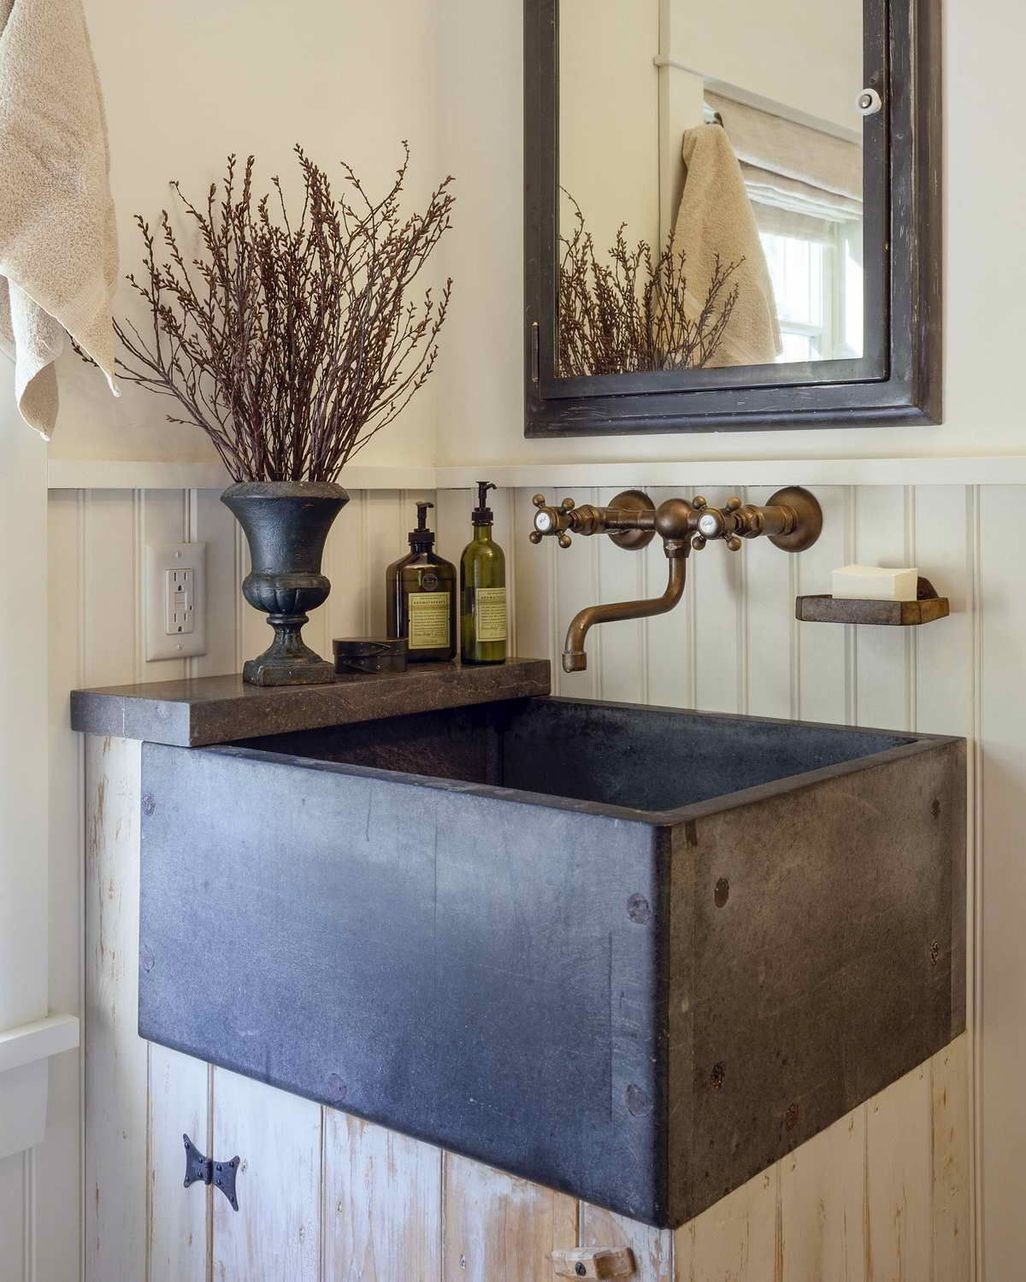 Special rustic basin sinks and trough sinks add character and